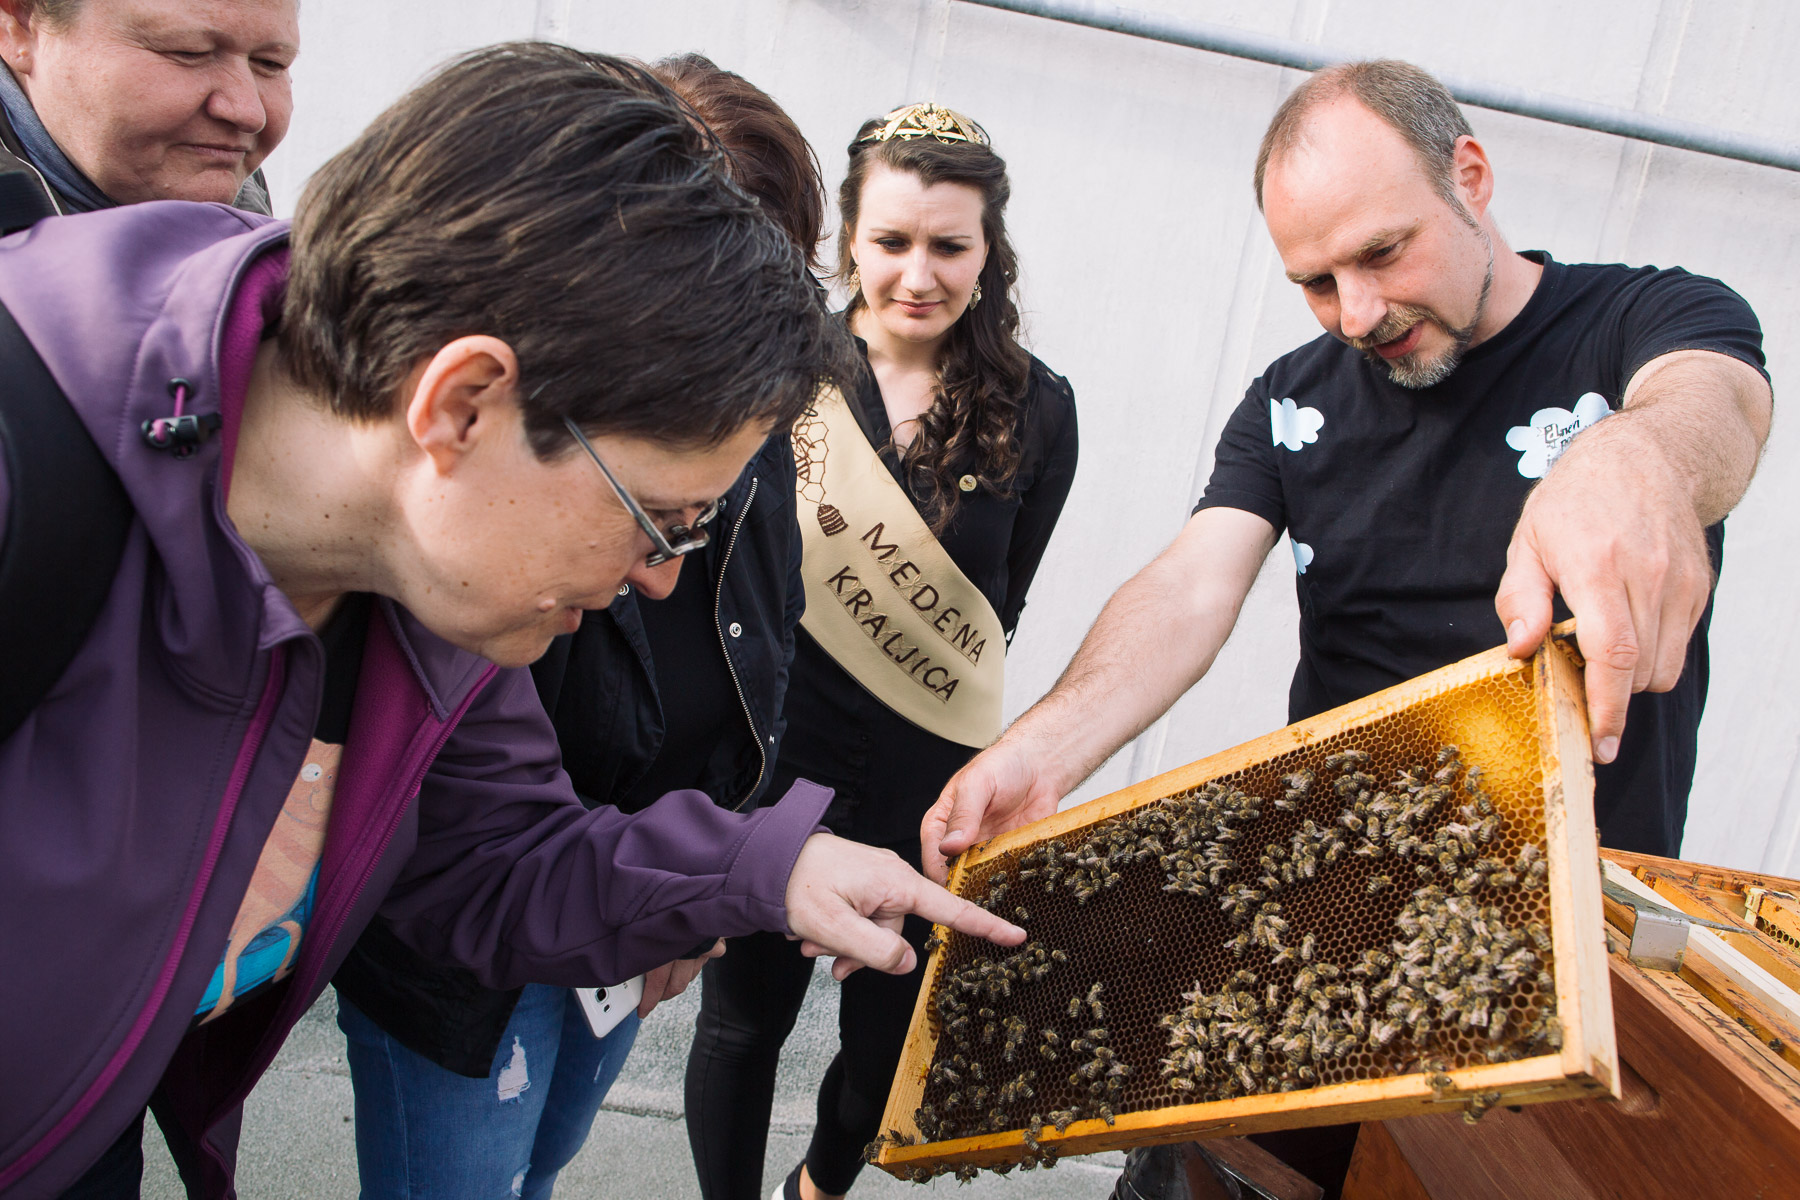 Ljubljana Beekeeping Trail, an organised tour of beehives in the city and history of urban beekeeping in Ljubljana. In 2017, the running Slovenian Bee Queen joined one of the tours.